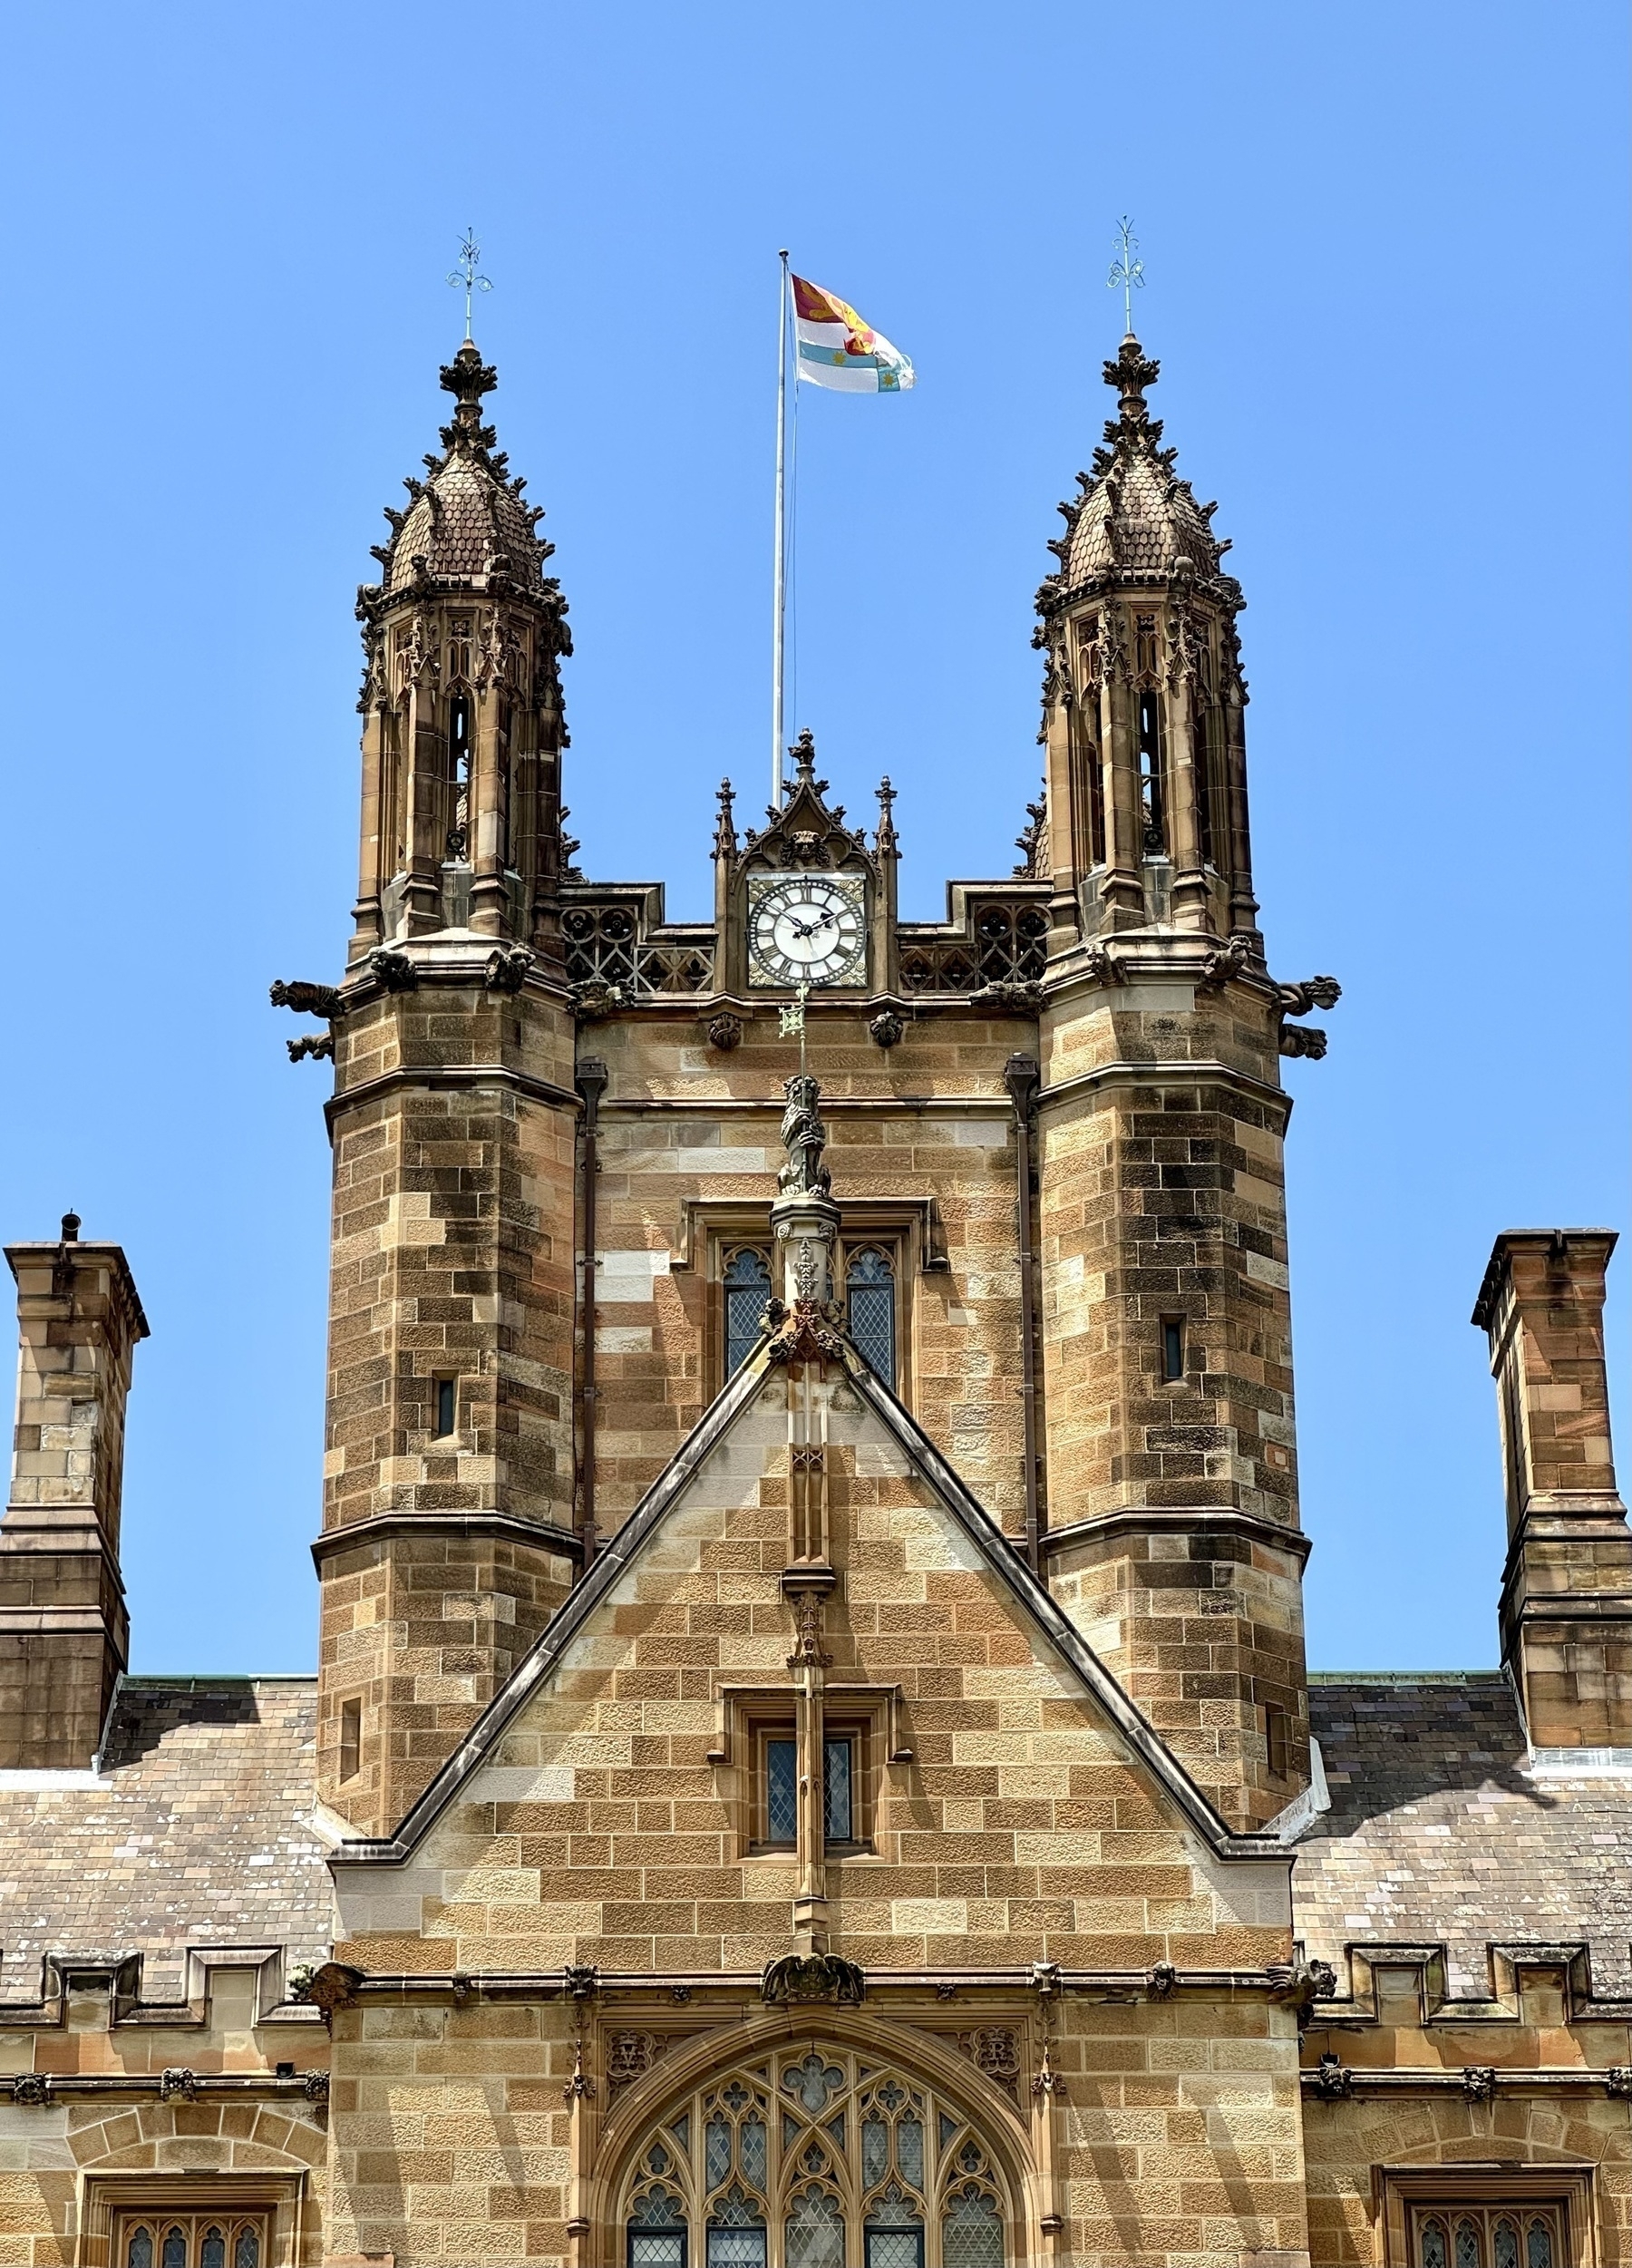 A flag flying from the top of an ornate sandstone tower, with a bright blue sky behind.